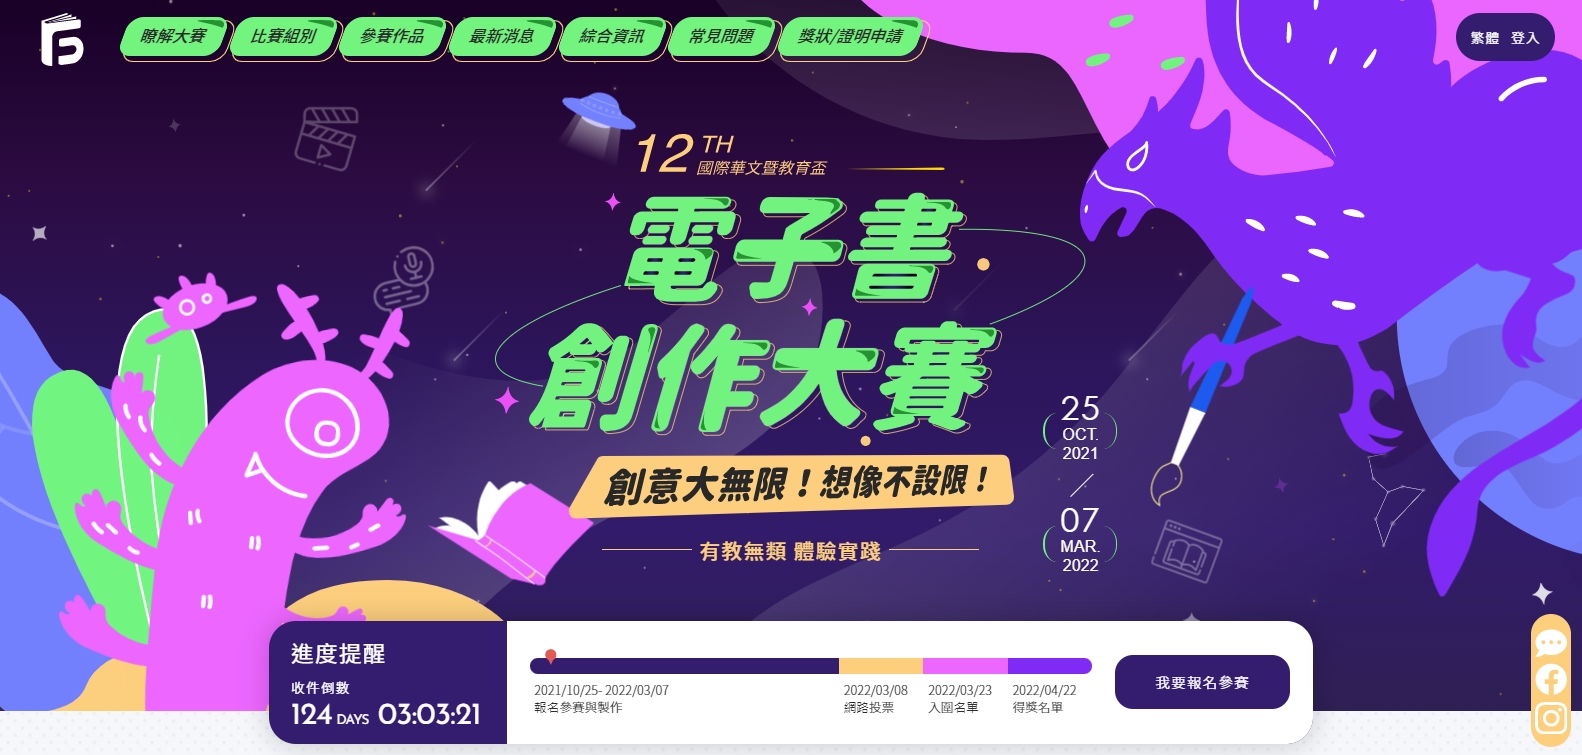 The 12th International Chinese Educational E-book Creative Contest